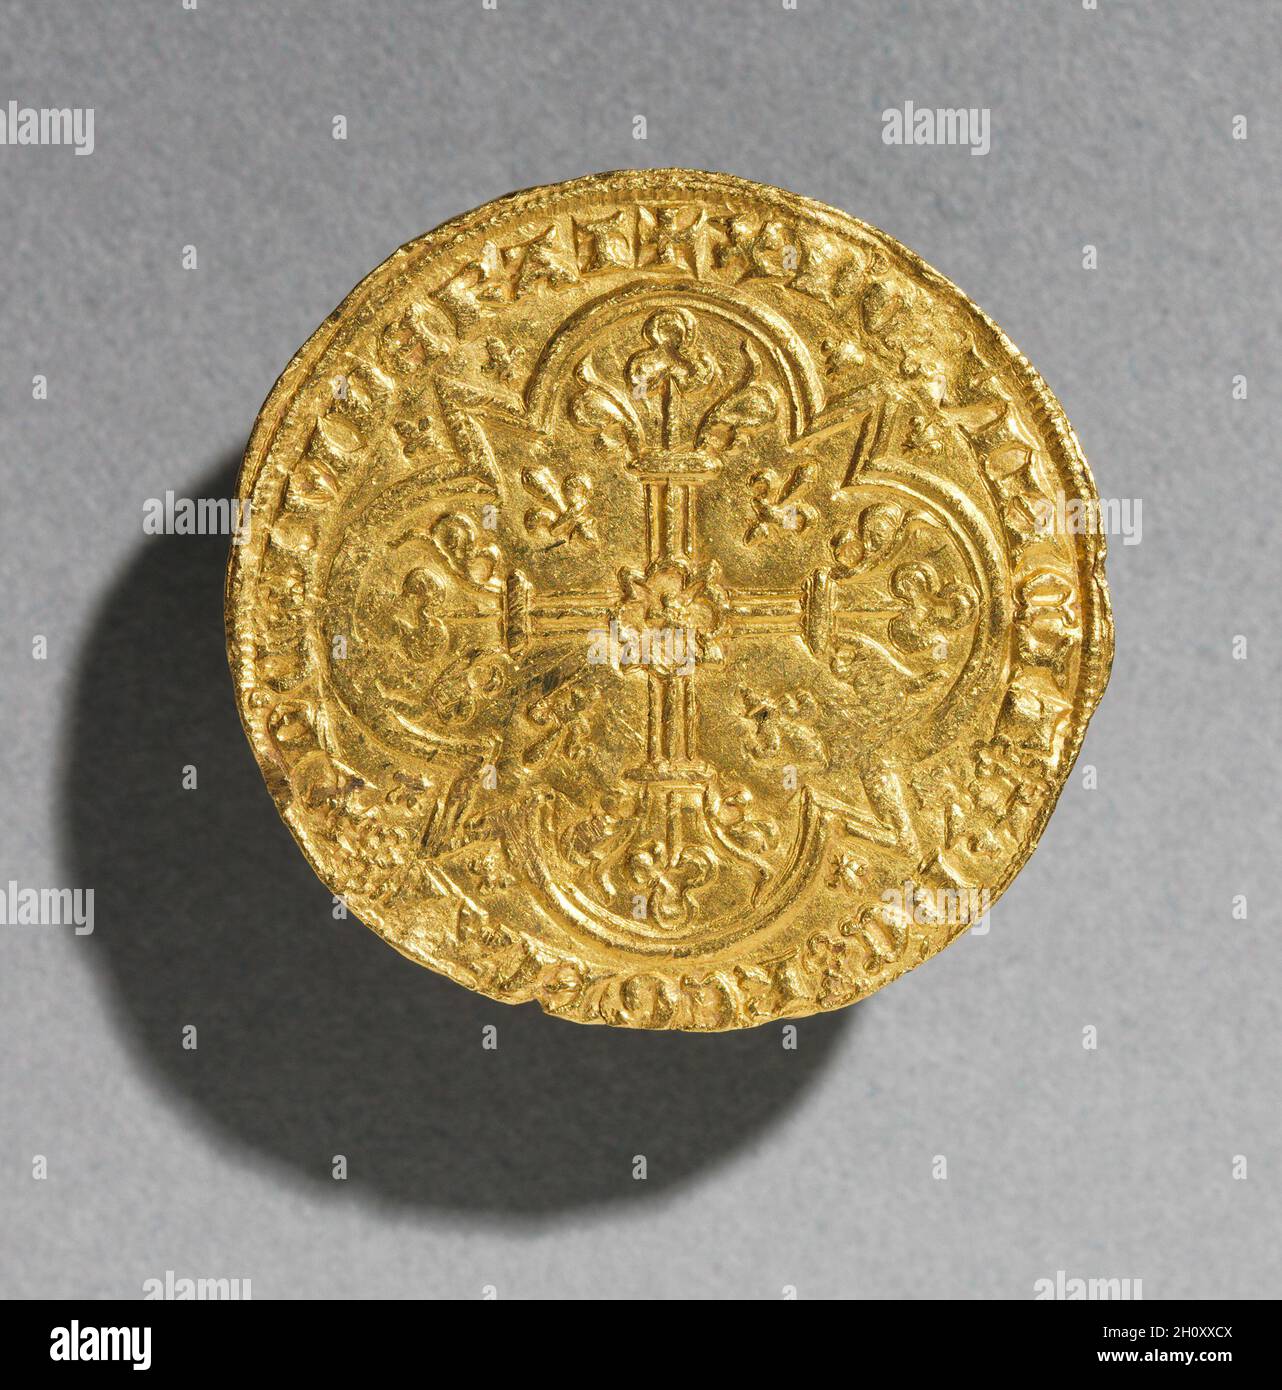 Mouton d'Or of King Jean le Bon of France, 1350-1364 (reverse), 1350-1364. France, Gothic period, 14th century. Gold; diameter: 3.1 cm (1 1/4 in.).  Because this gold coin represents the Paschal Lamb, a symbol of Christ, on one of its faces, it is known as a 'Golden Sheep'--Mouton d'Or in French. Stock Photo